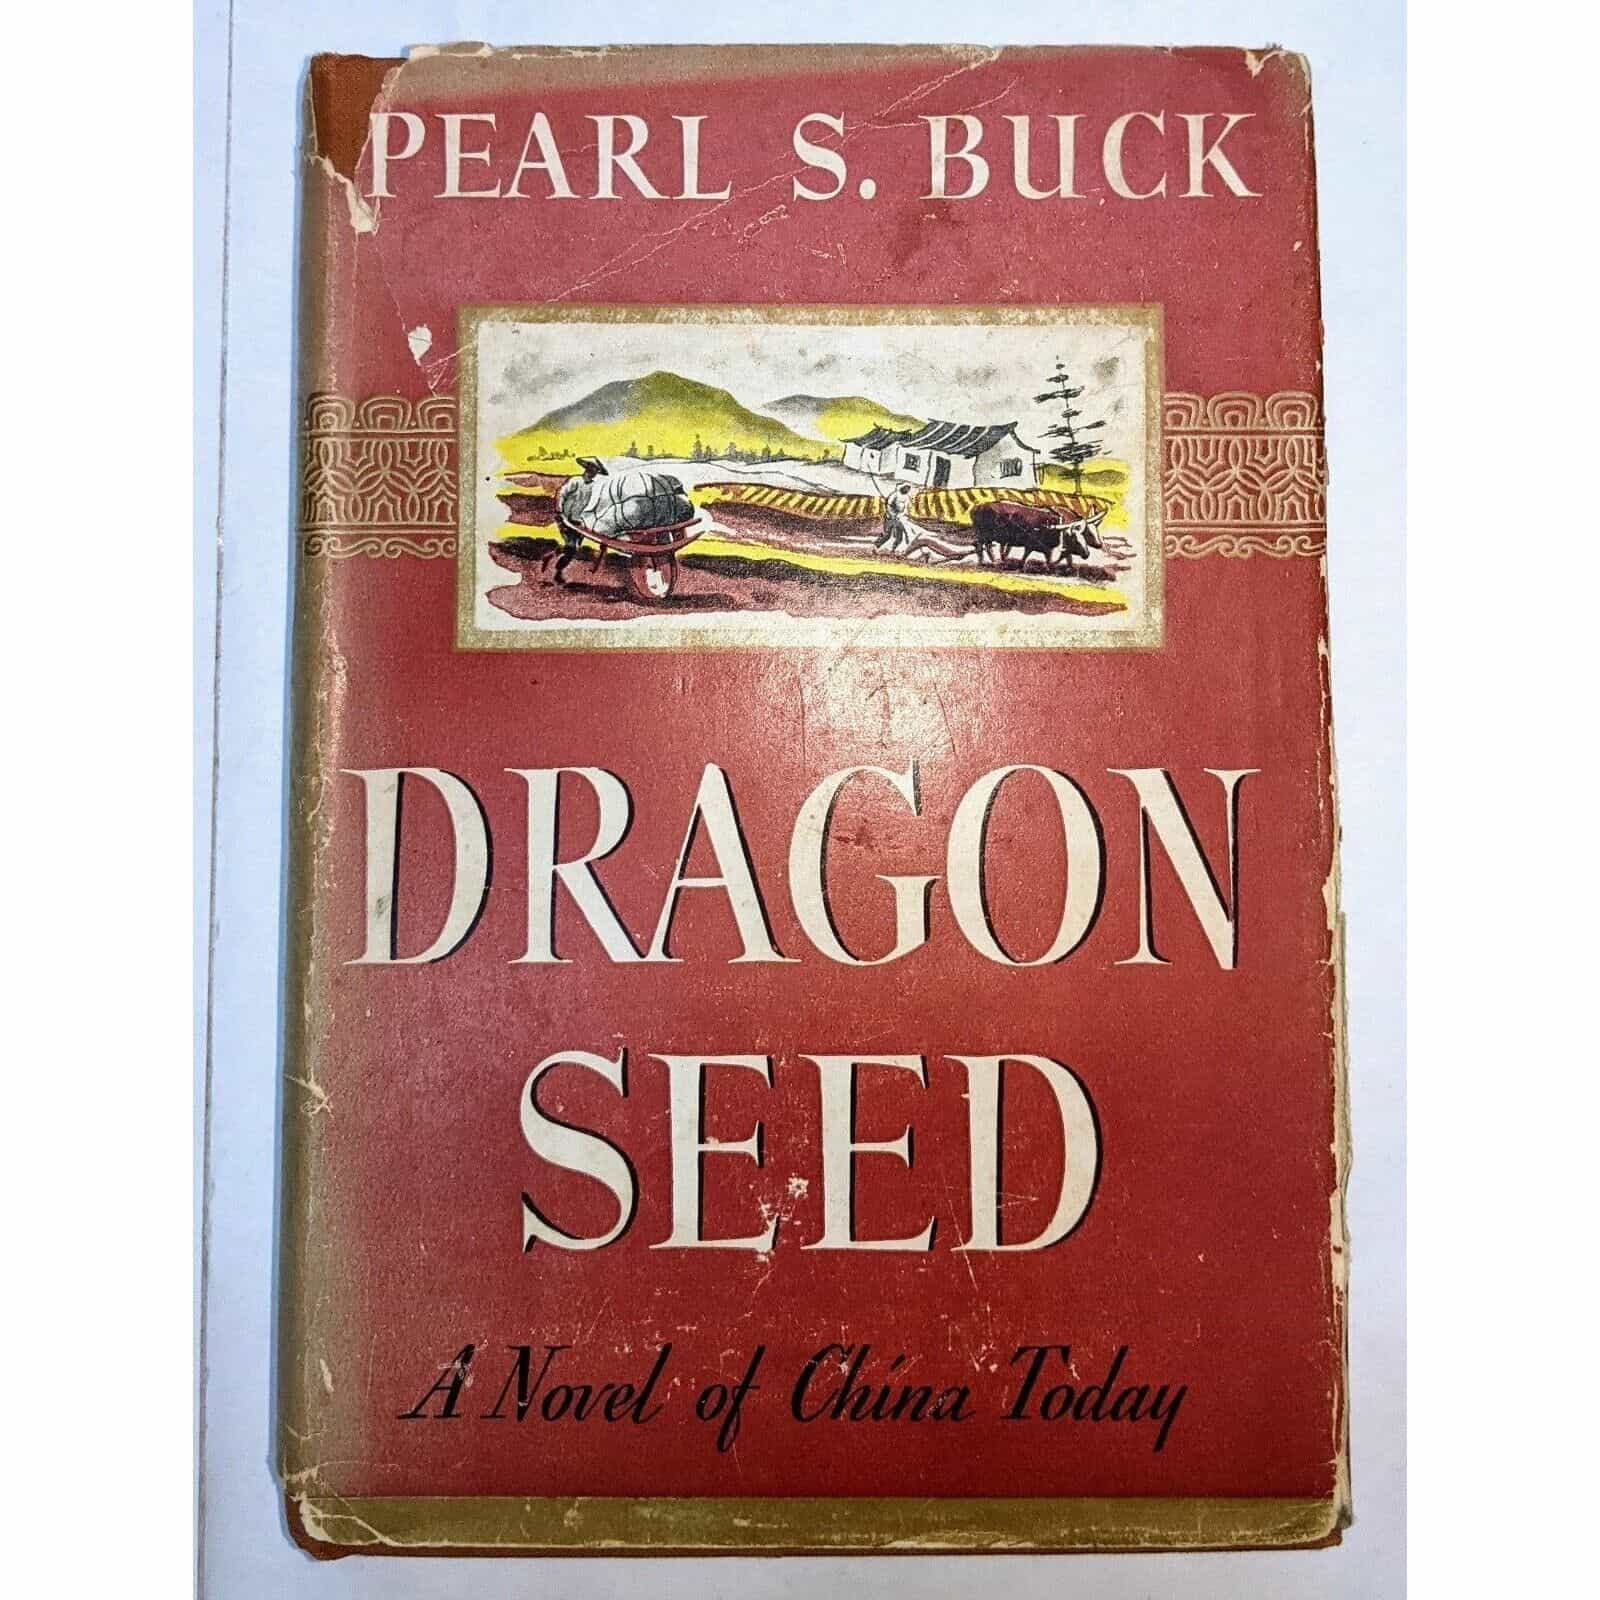 Dragon Seed by Pearl S. Buck Antique Book